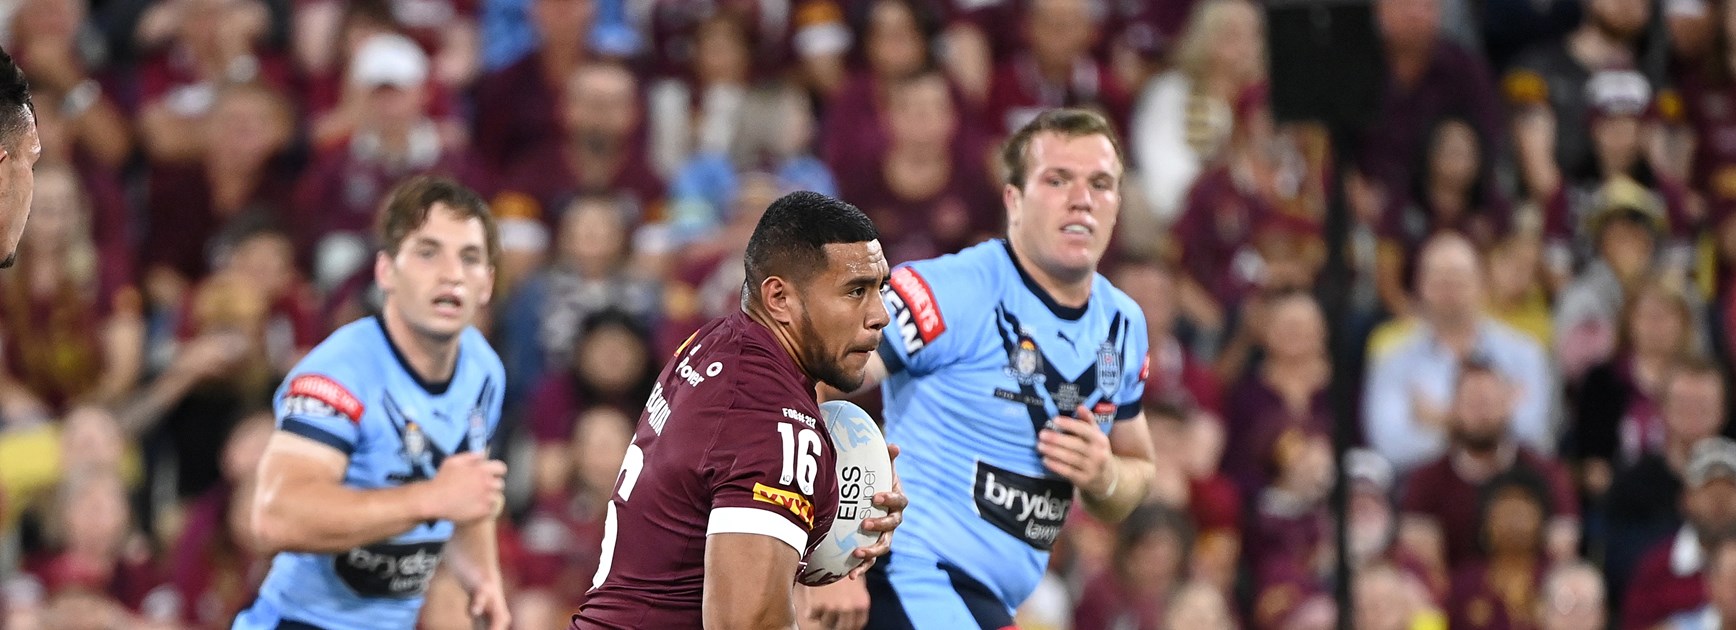 Maroons look to lift after NSW prove too good in Townsville